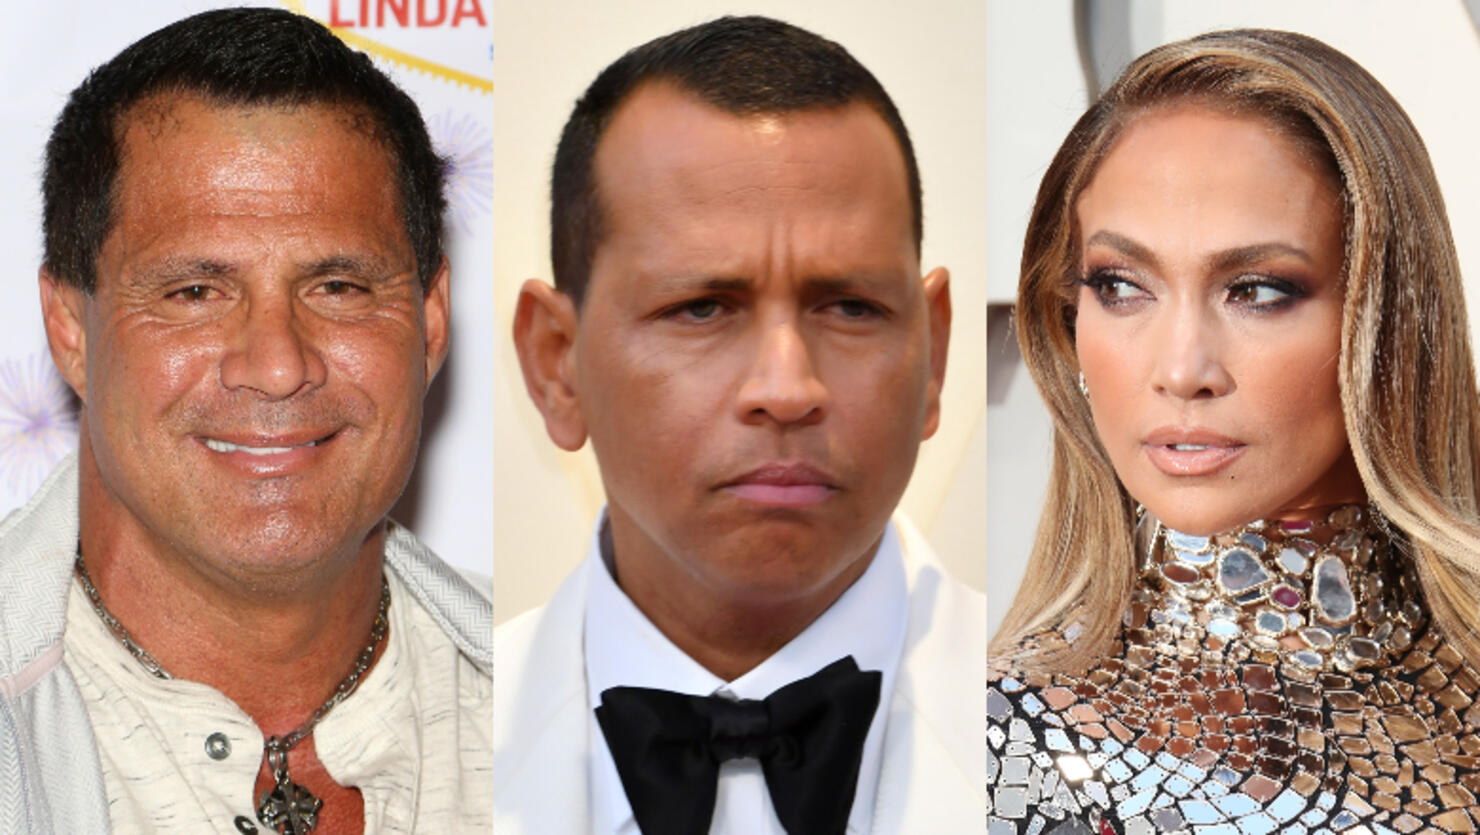 Jose Canseco Shades Alex Rodriguez & Accuses Him Of Cheating On JLo!